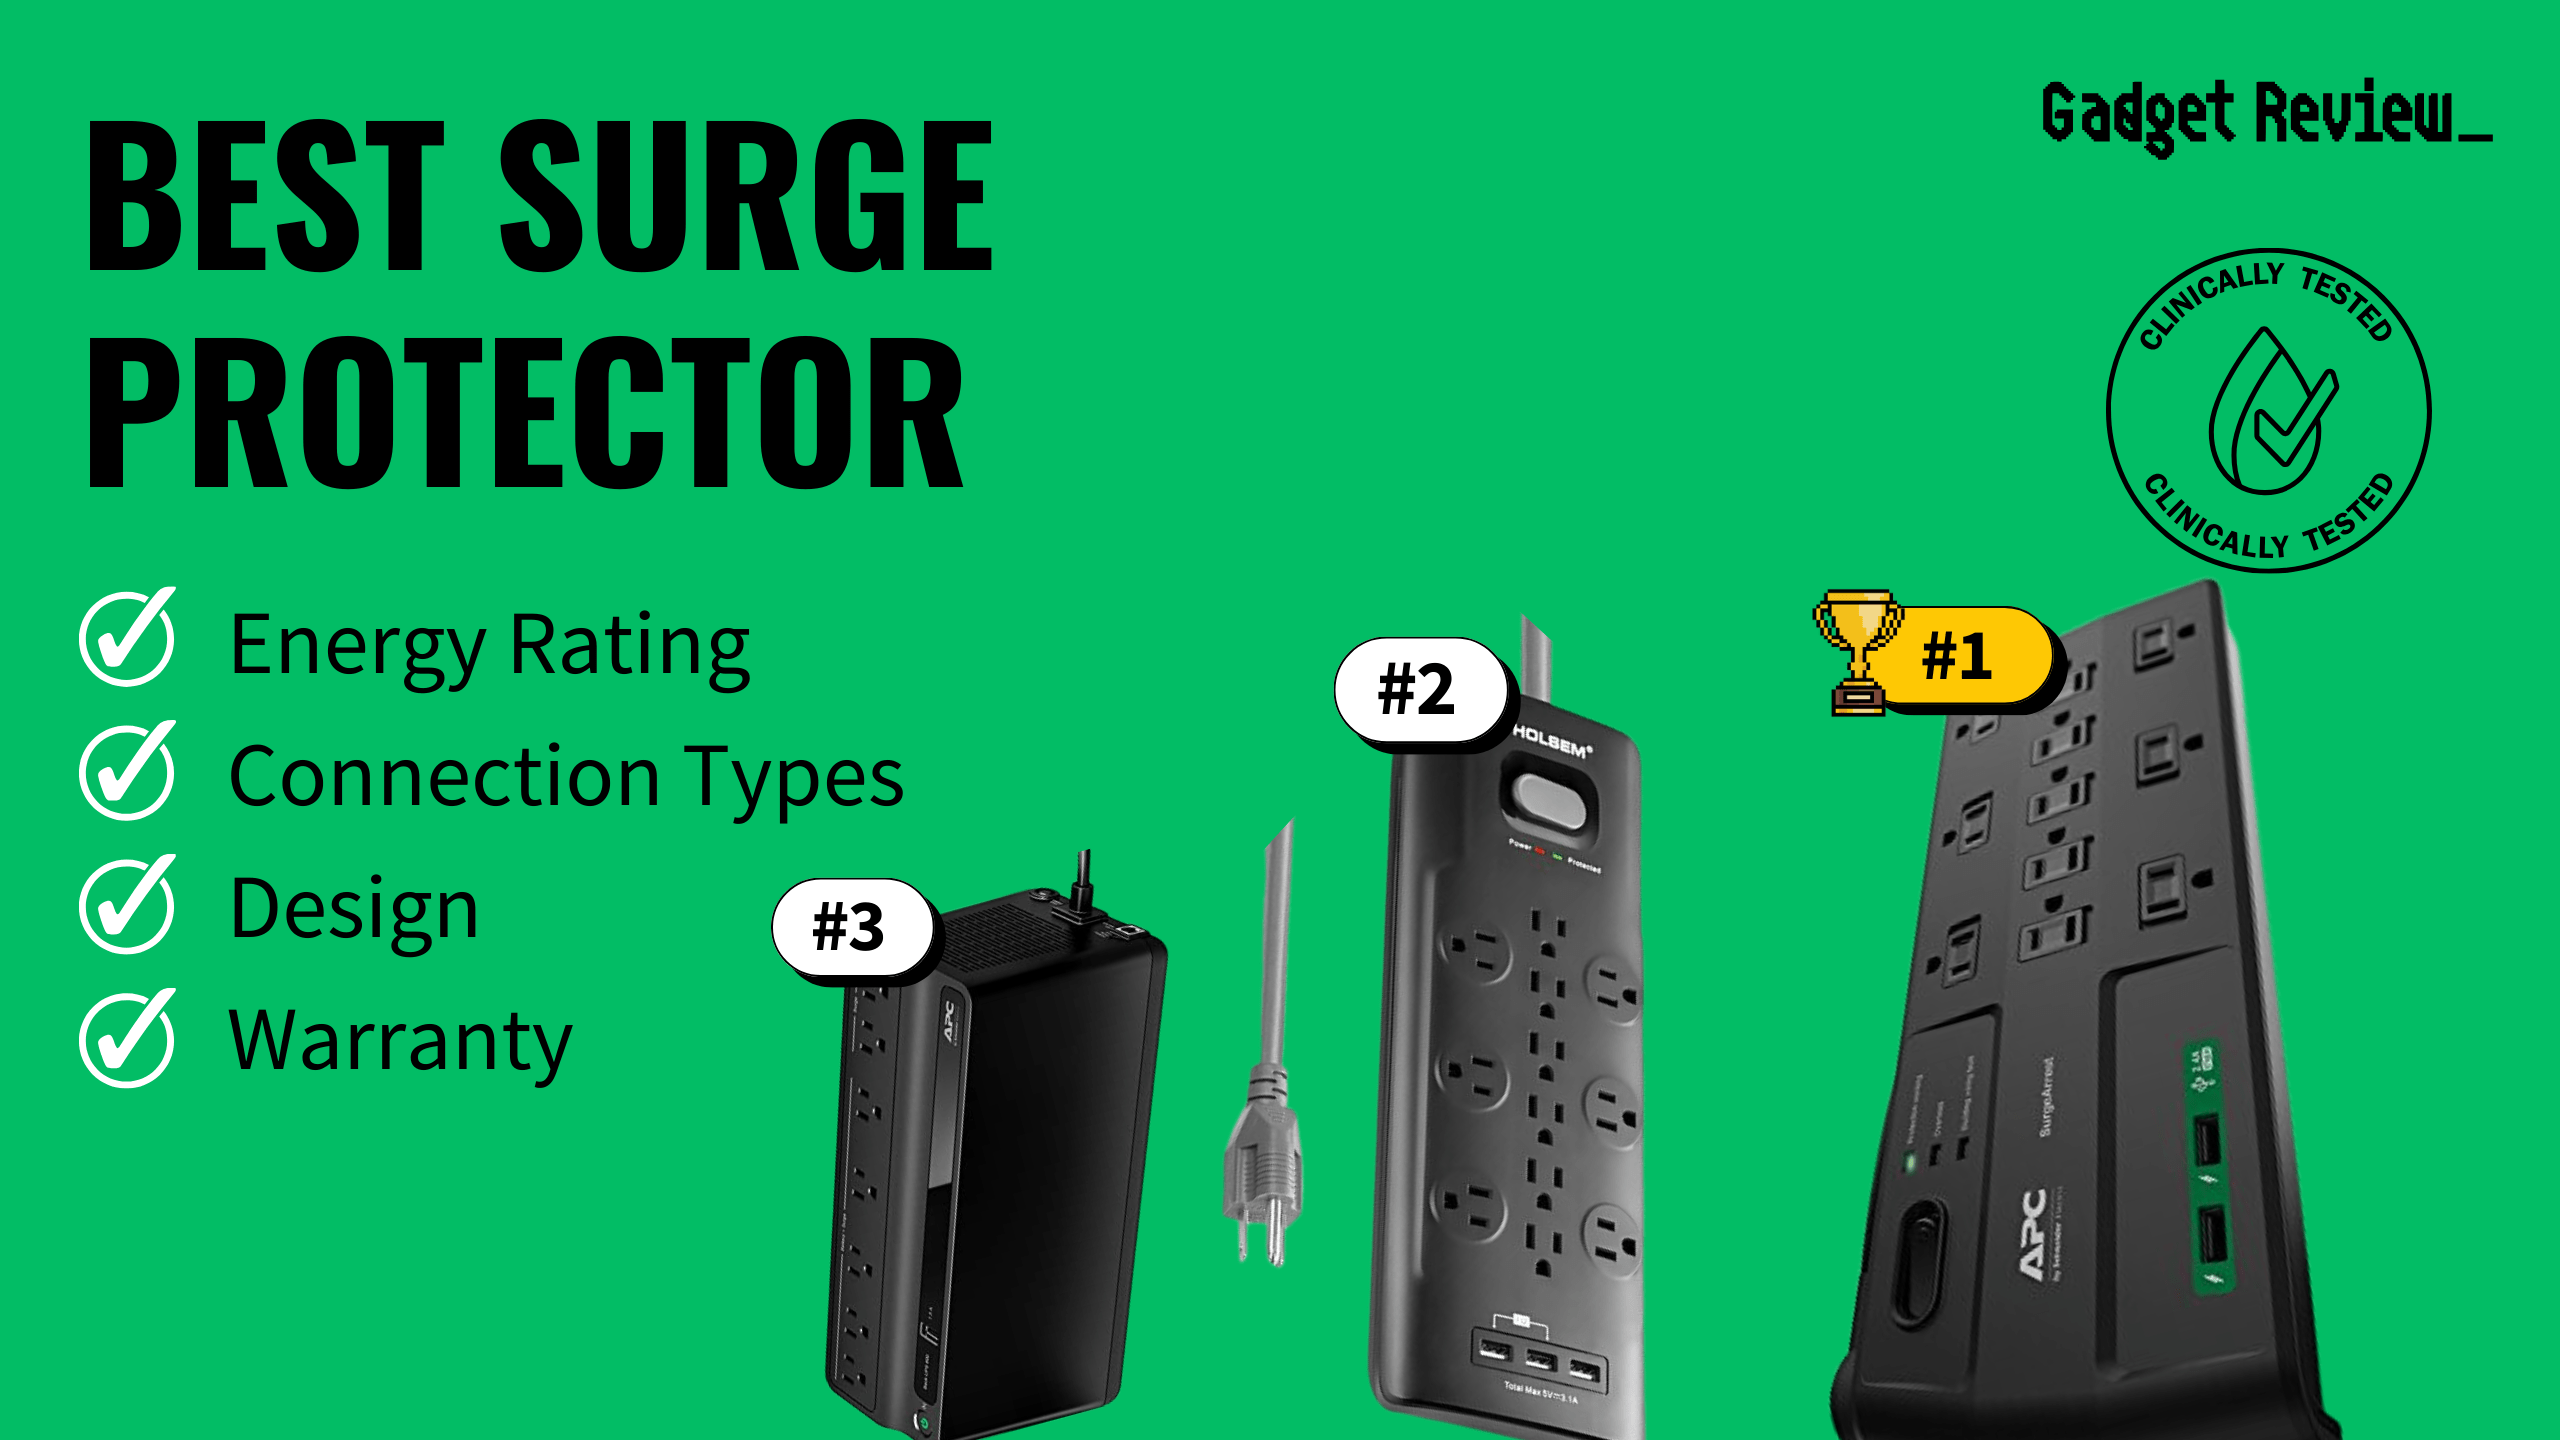 best surge protector featured image that shows the top three best speaker models